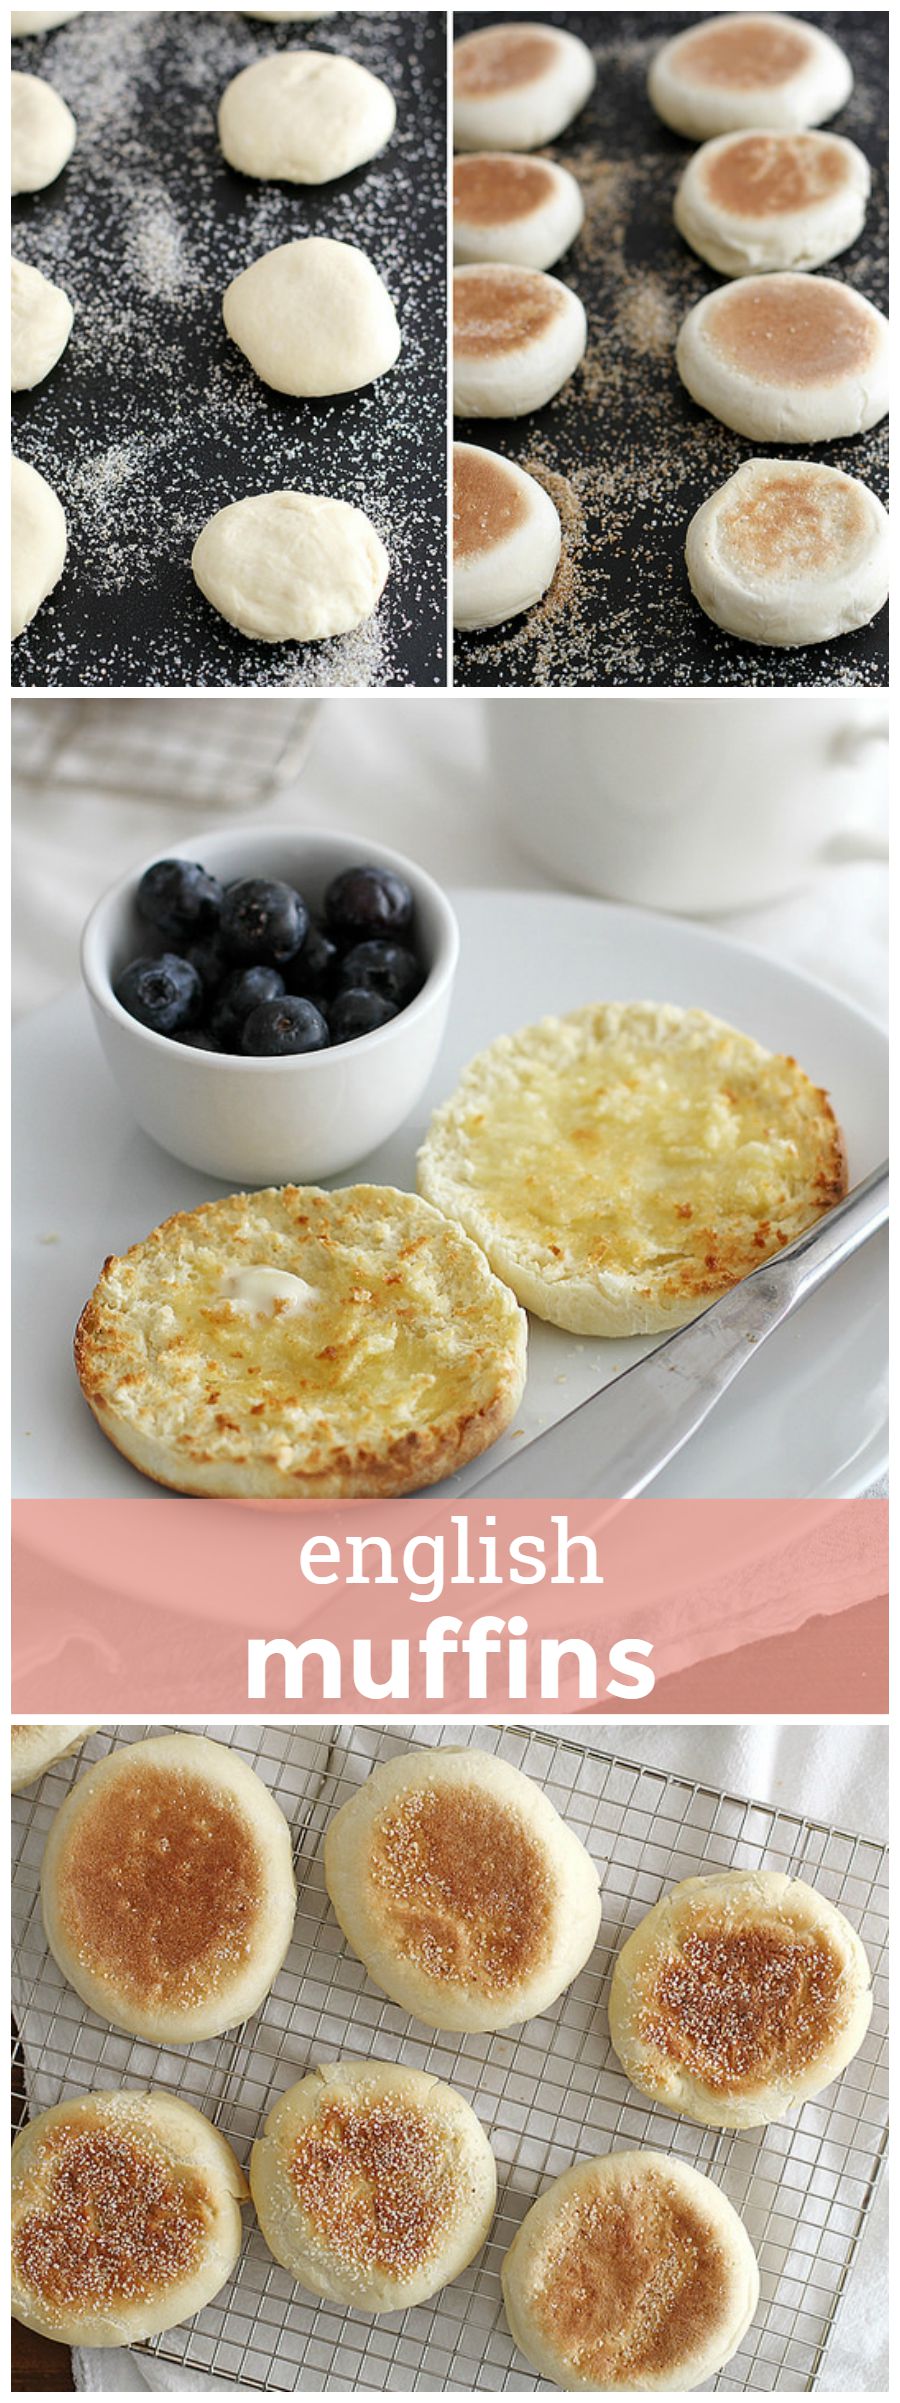 English Muffins -- All the nooks and crannies for butter, jam, etc. all made from scratch! www.girlversusdough.com @girlversusdough